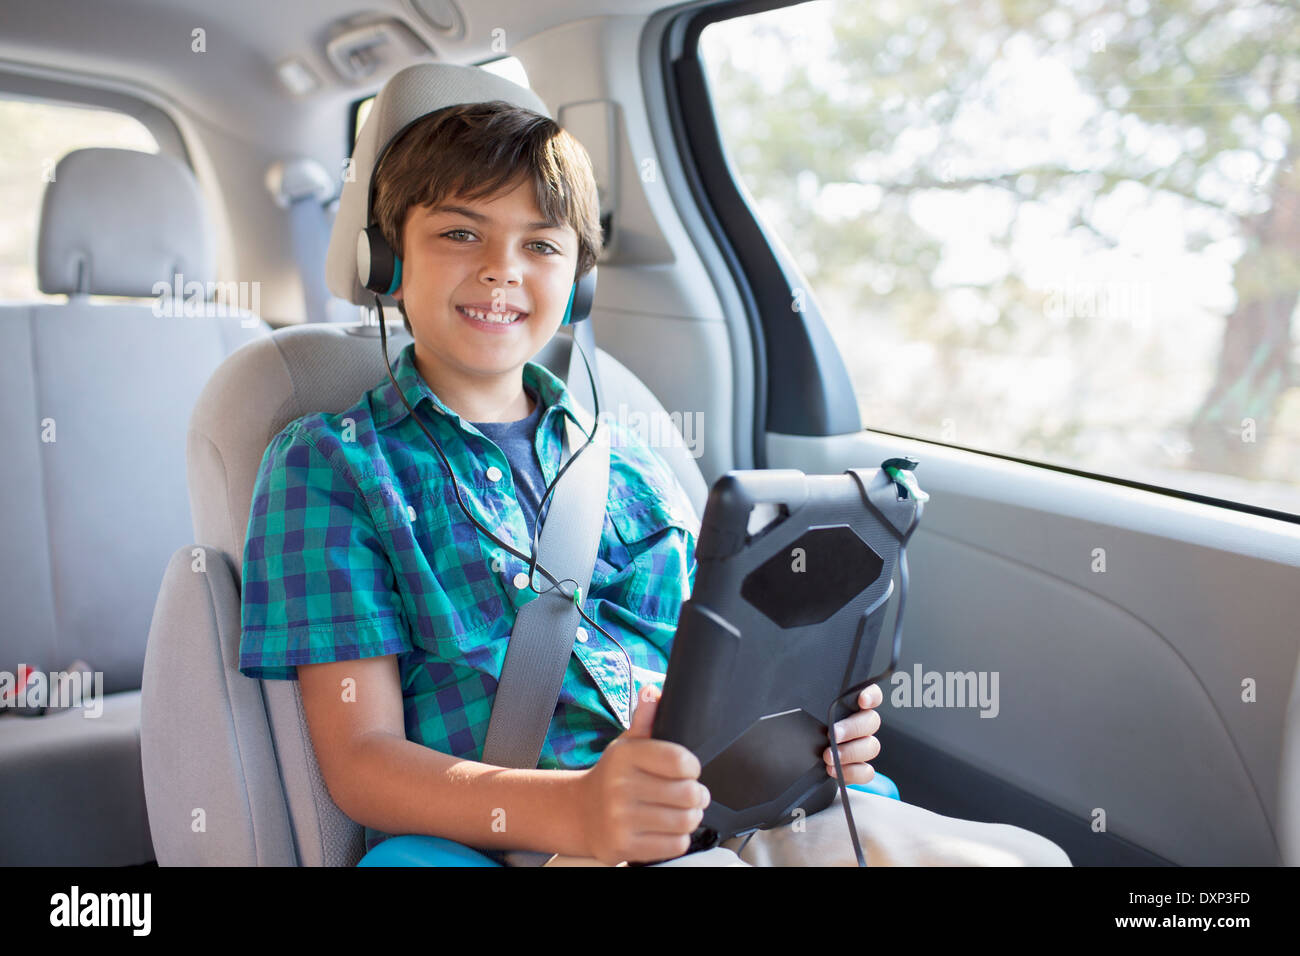 Portrait of happy boy with headphones using digital tablet in back seat of car Stock Photo